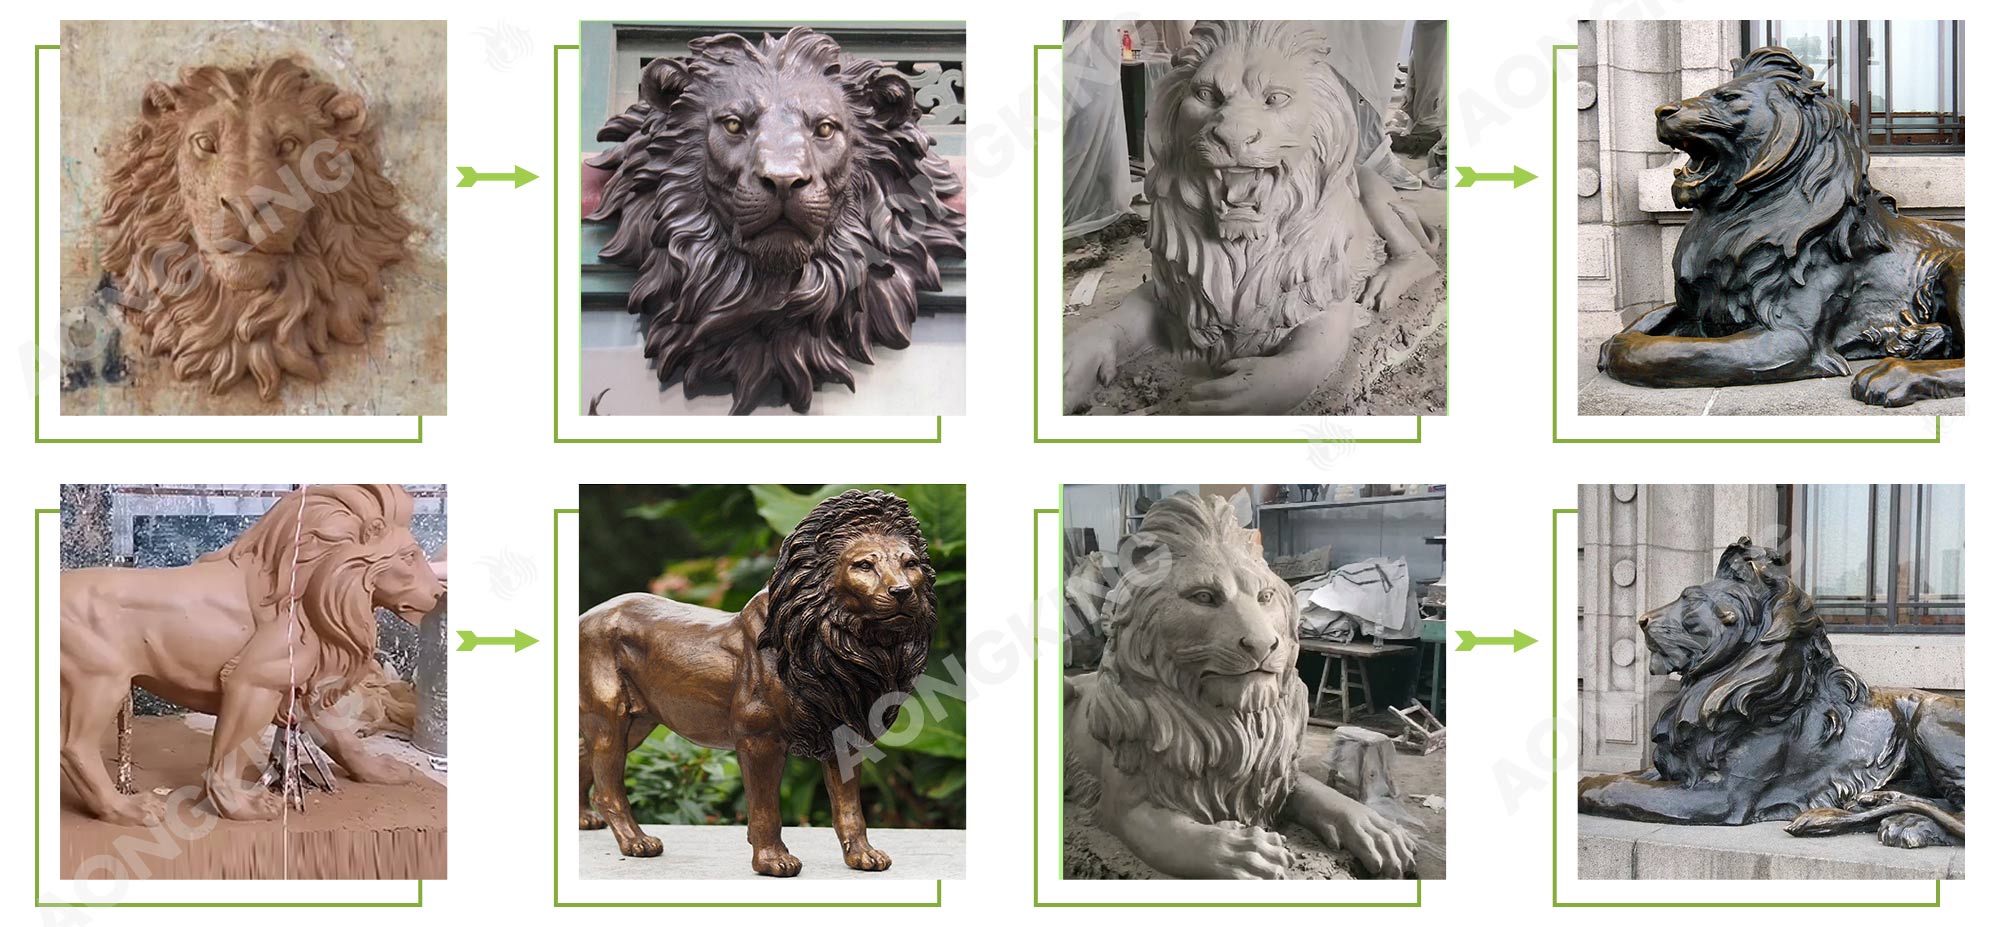 foo dog statue projects